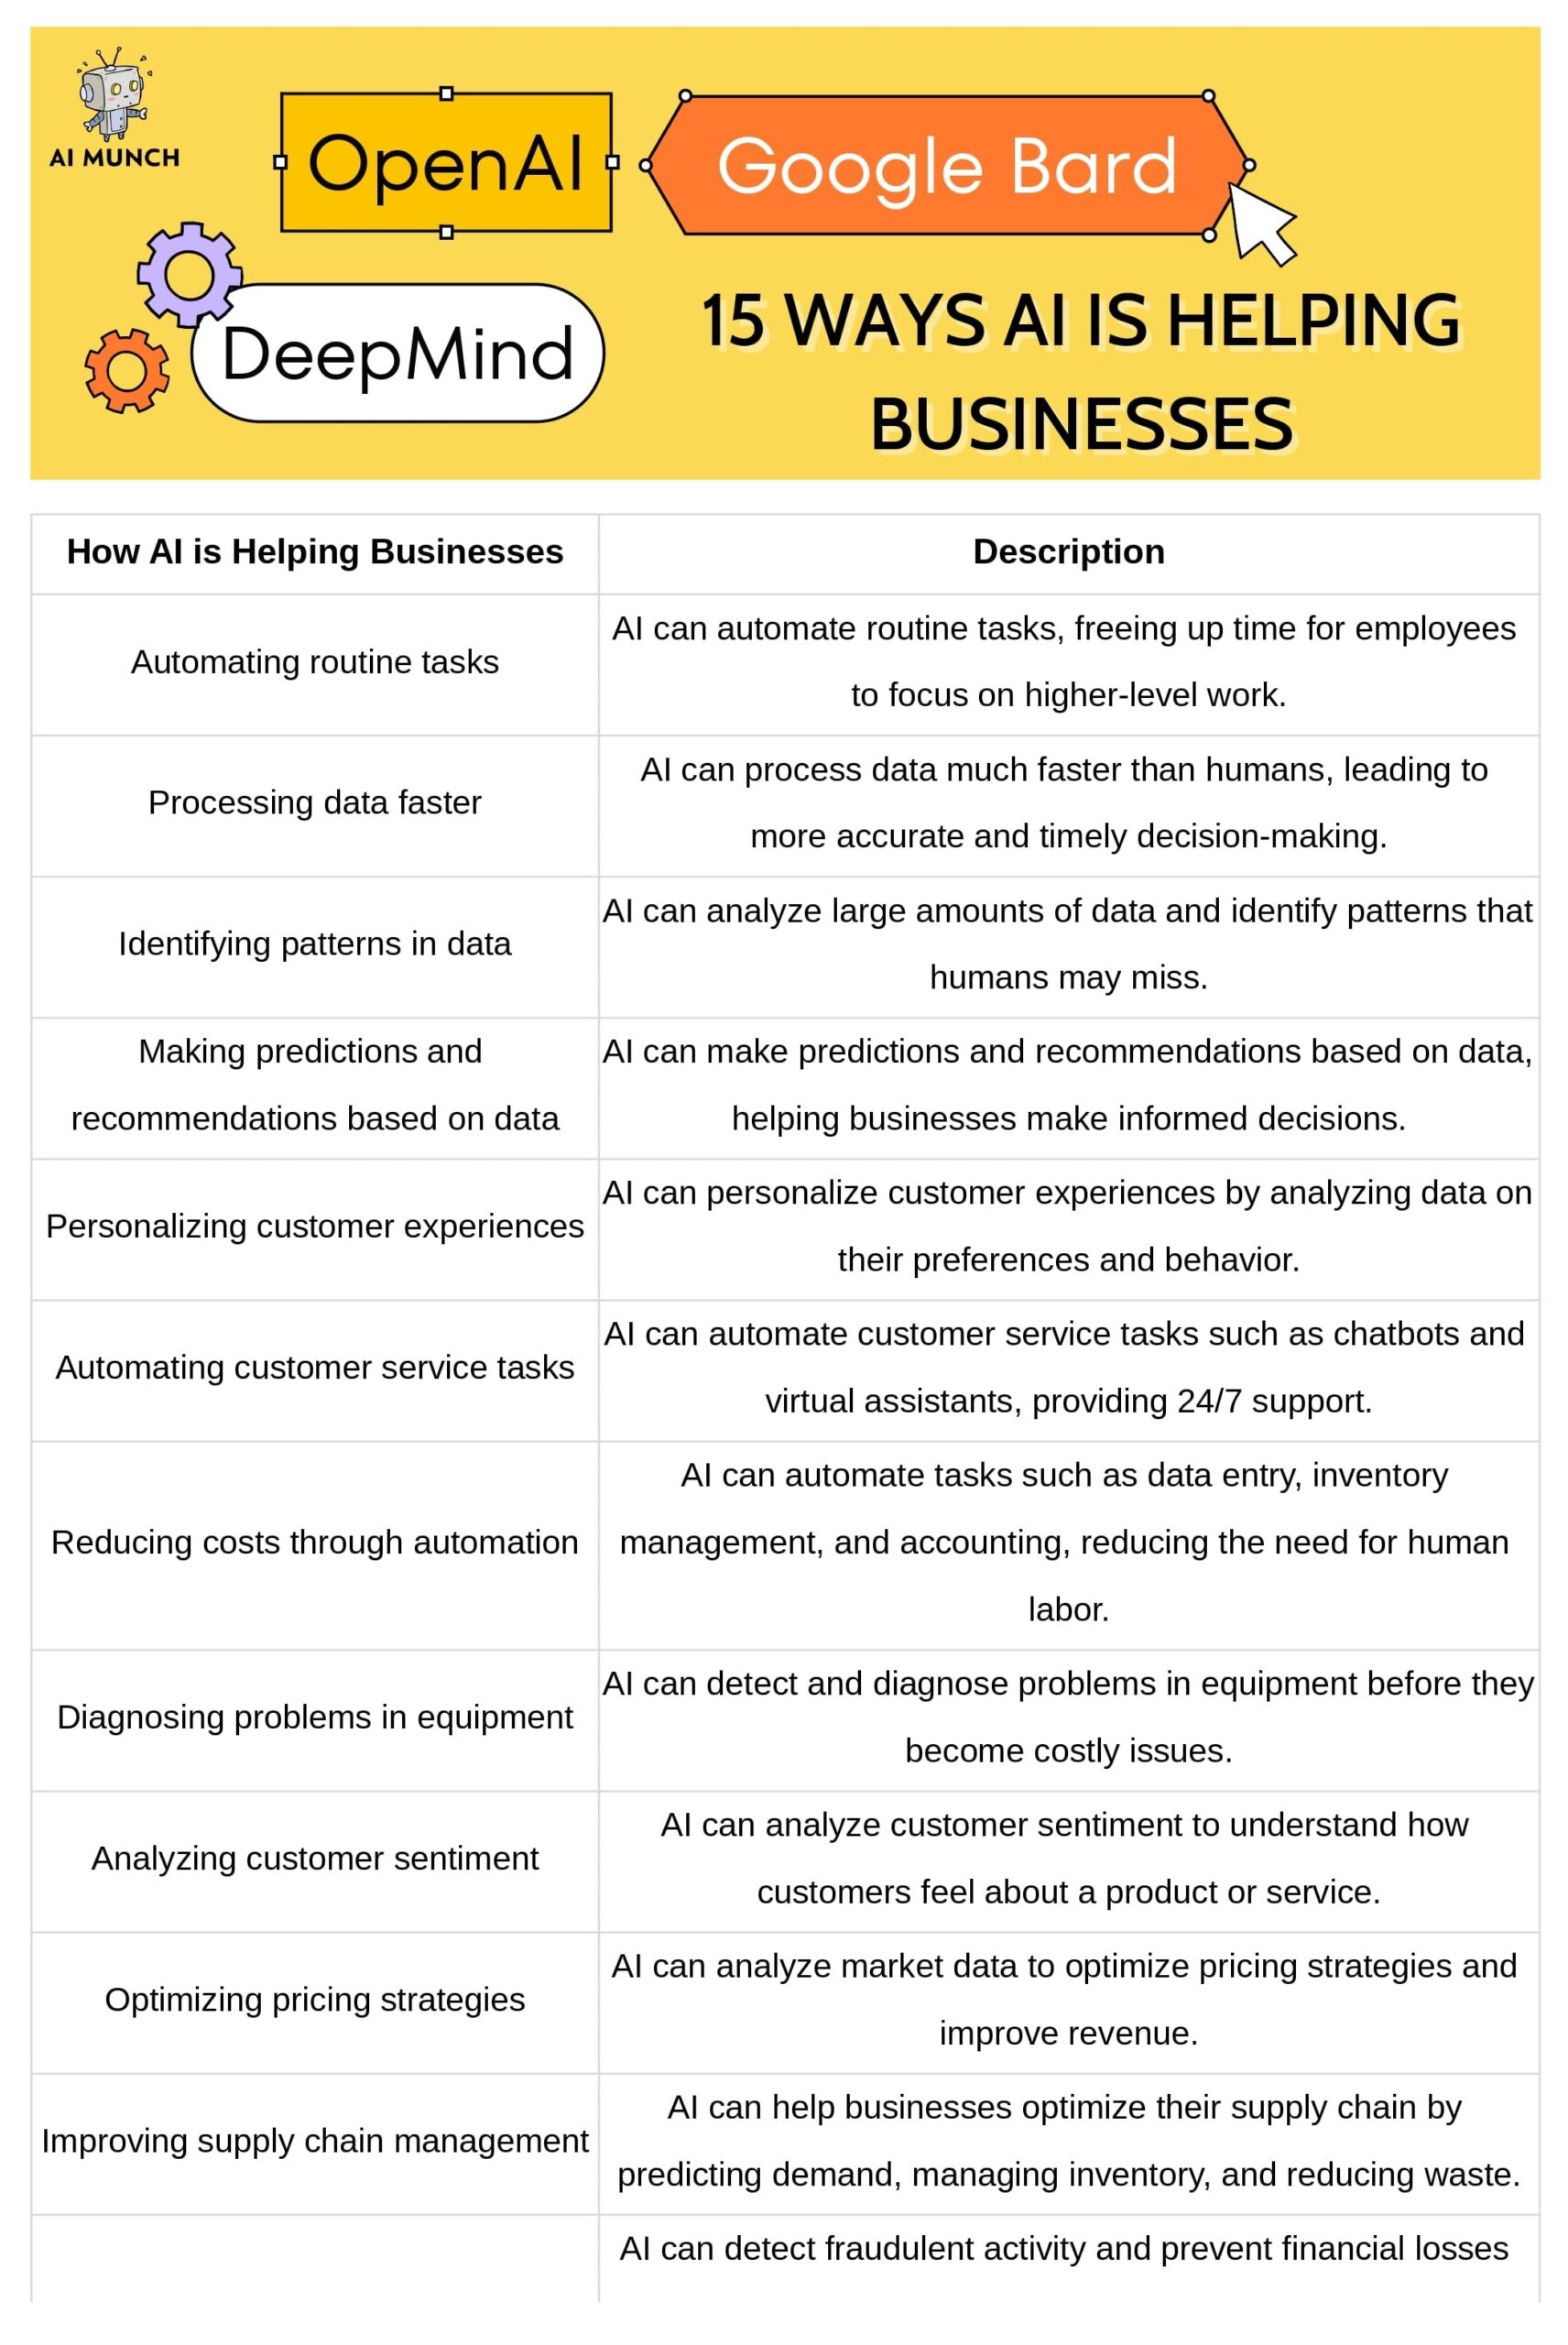 examples of artificial intelligence in business , how will ai affect business in the future , artificial intelligence for business , ai in business , artificial intelligence in business